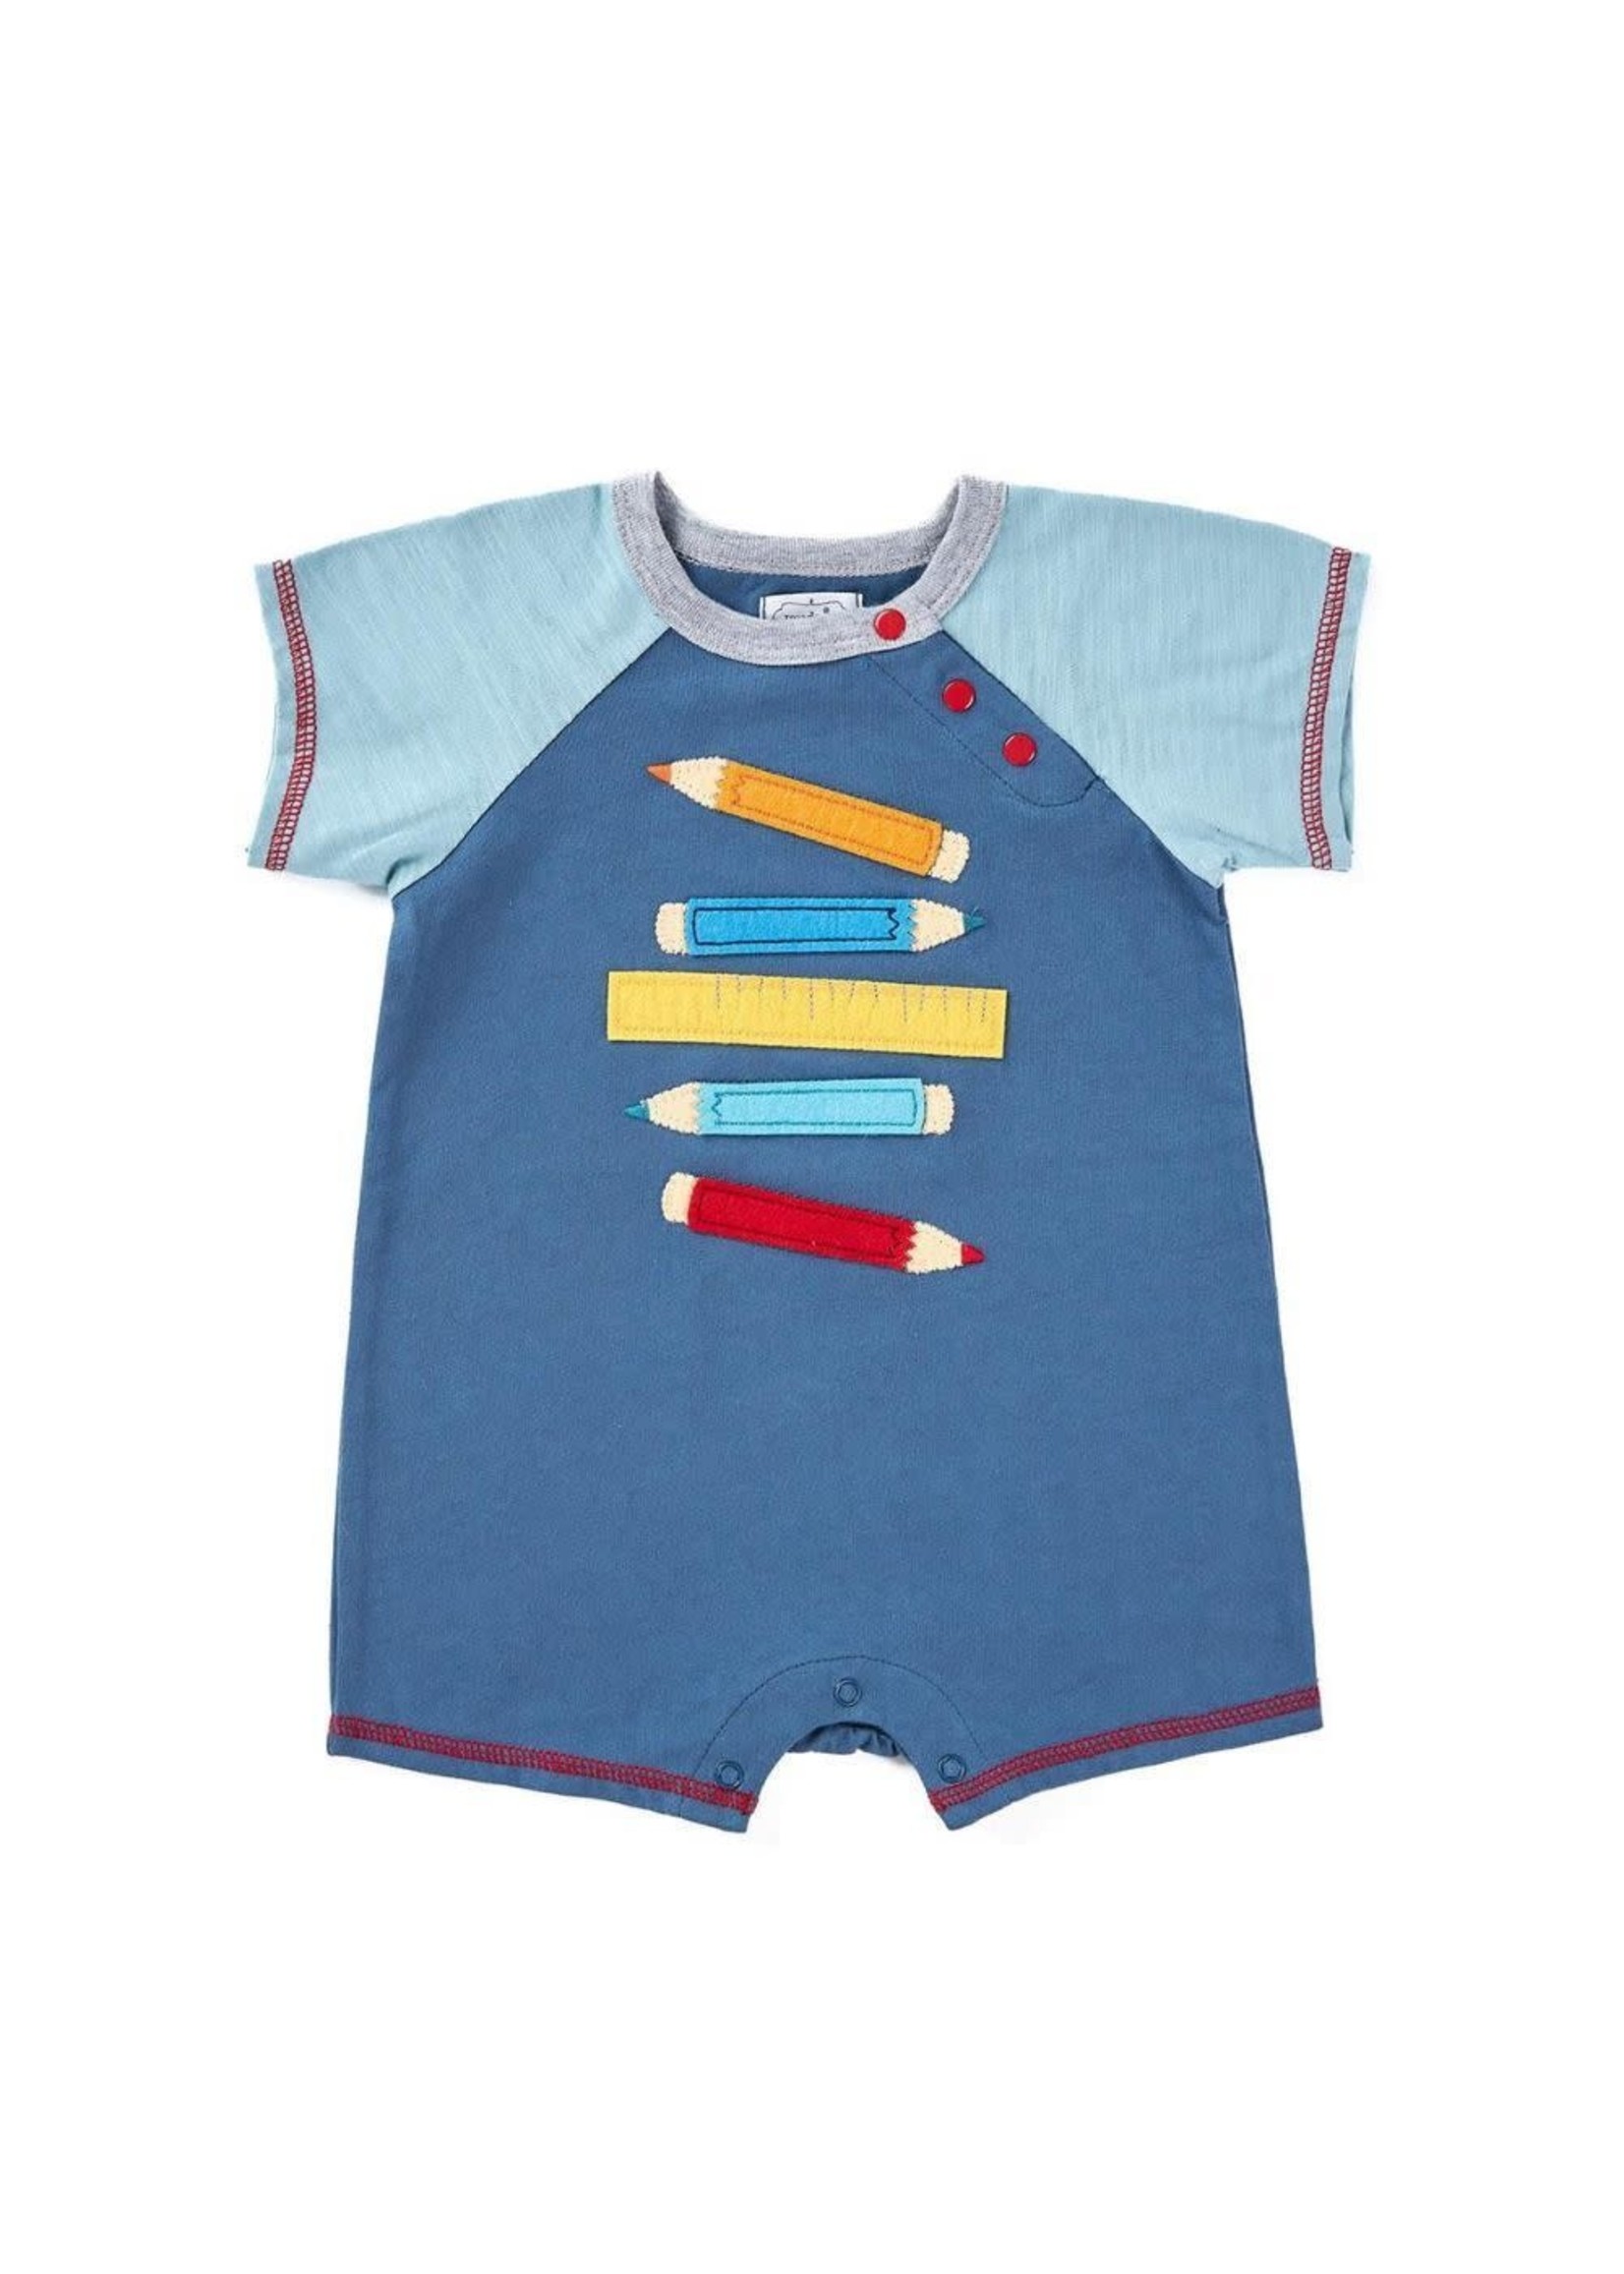 MudPie Pencil and Ruler Shortall